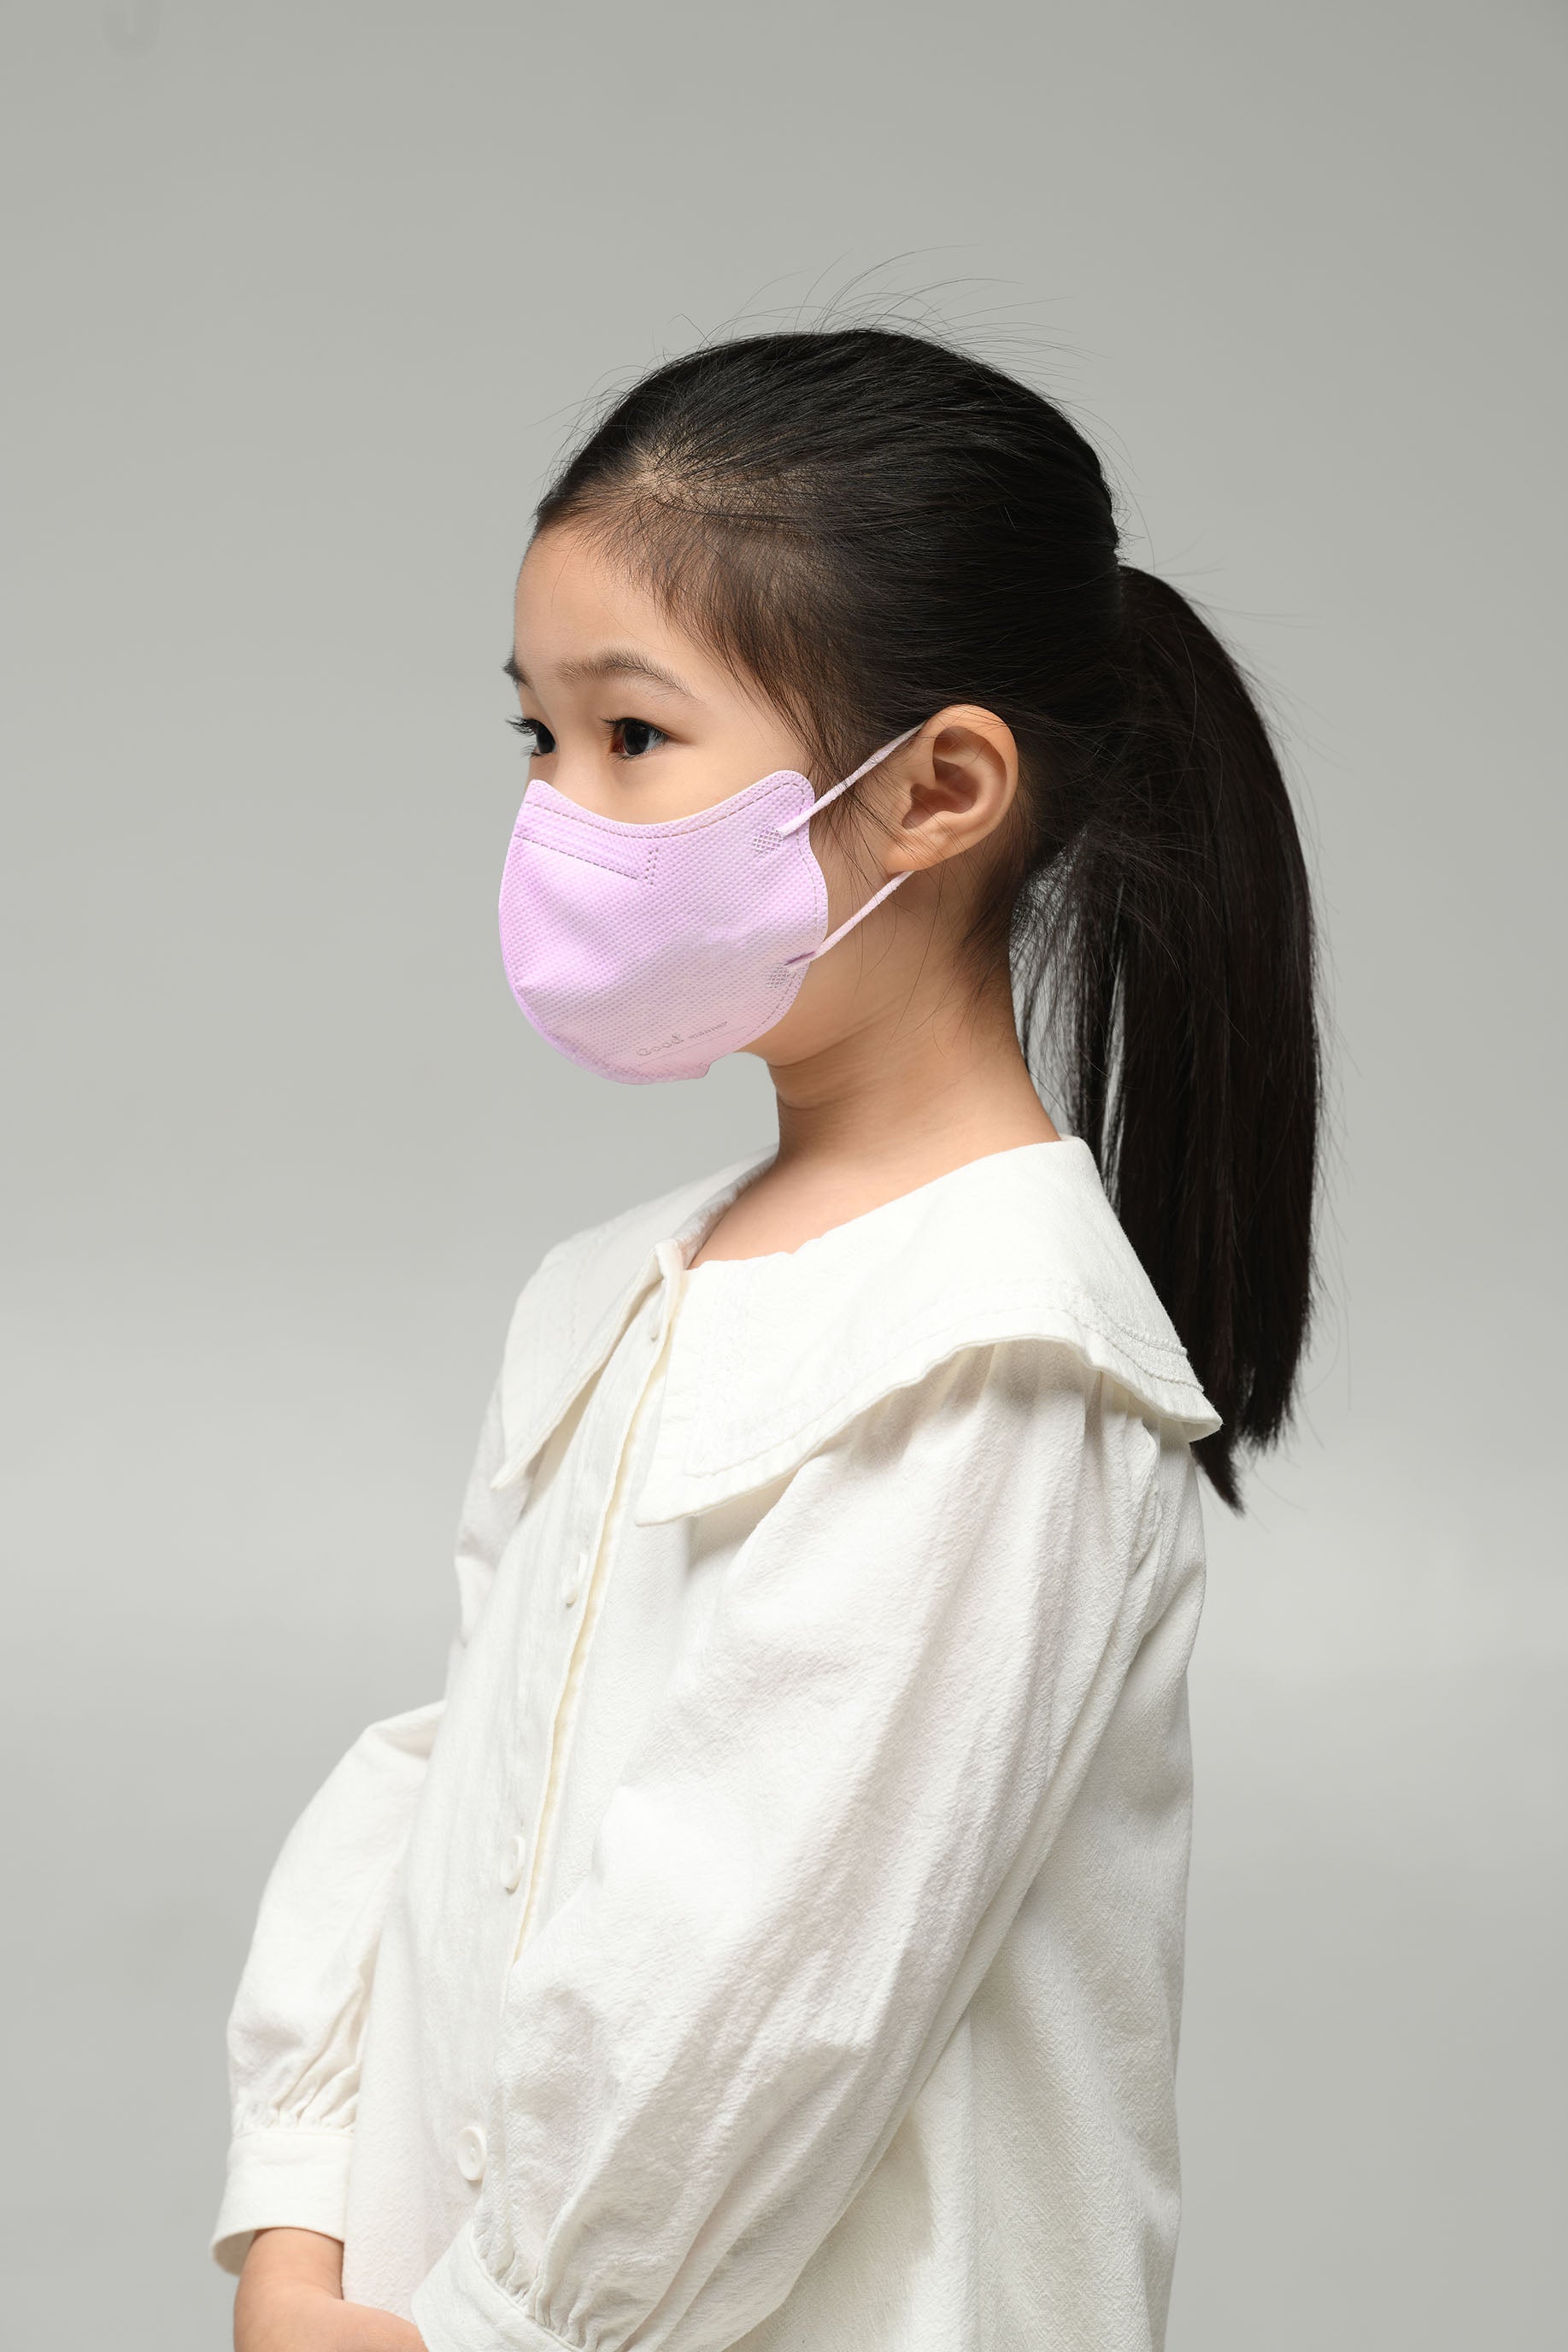 Good Manner KF94 Masks Canada for Toddlers XS, Pink, (ages 3 to 5), 25 masks./ Free Shipping within Canada-The Authorized Distributor in Canada. | Clear Pro Global_Good Manner